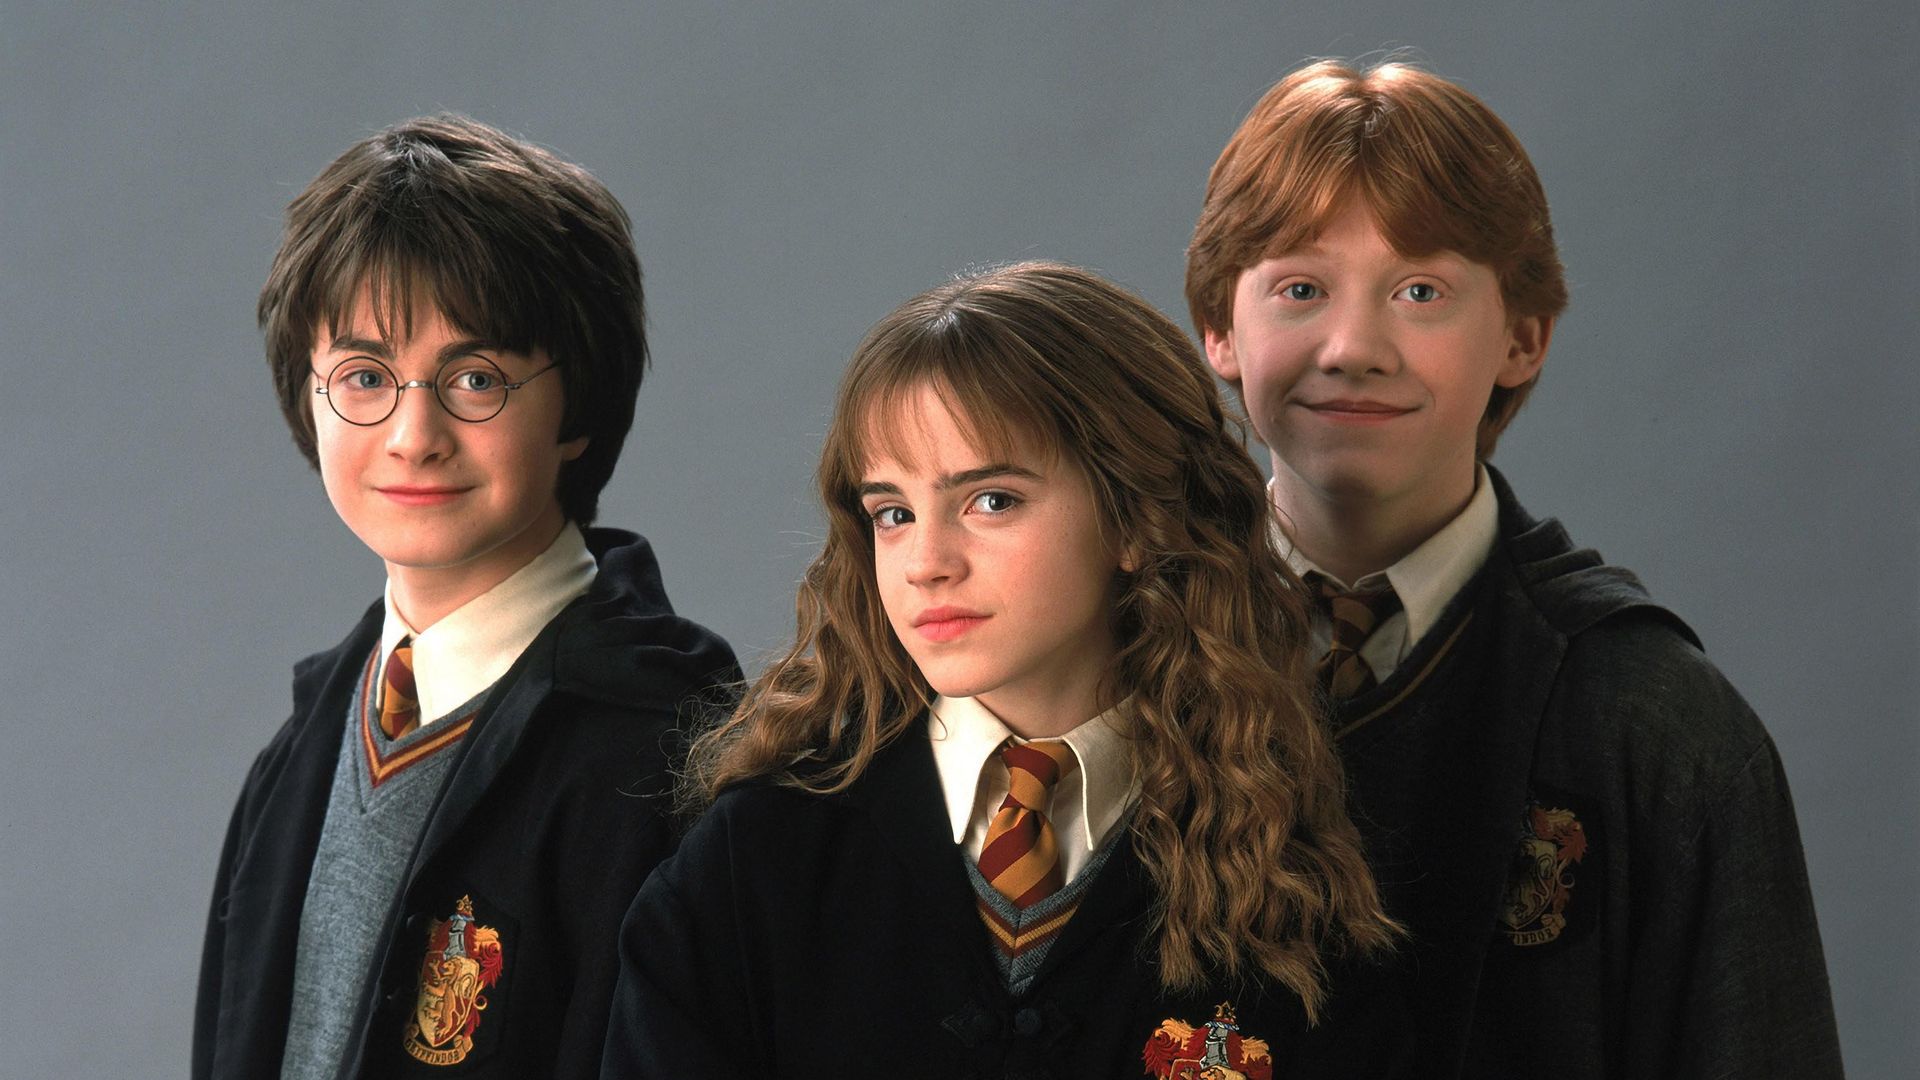 Harry Potter star shares 'disappointing' truth about the movies, revealing details